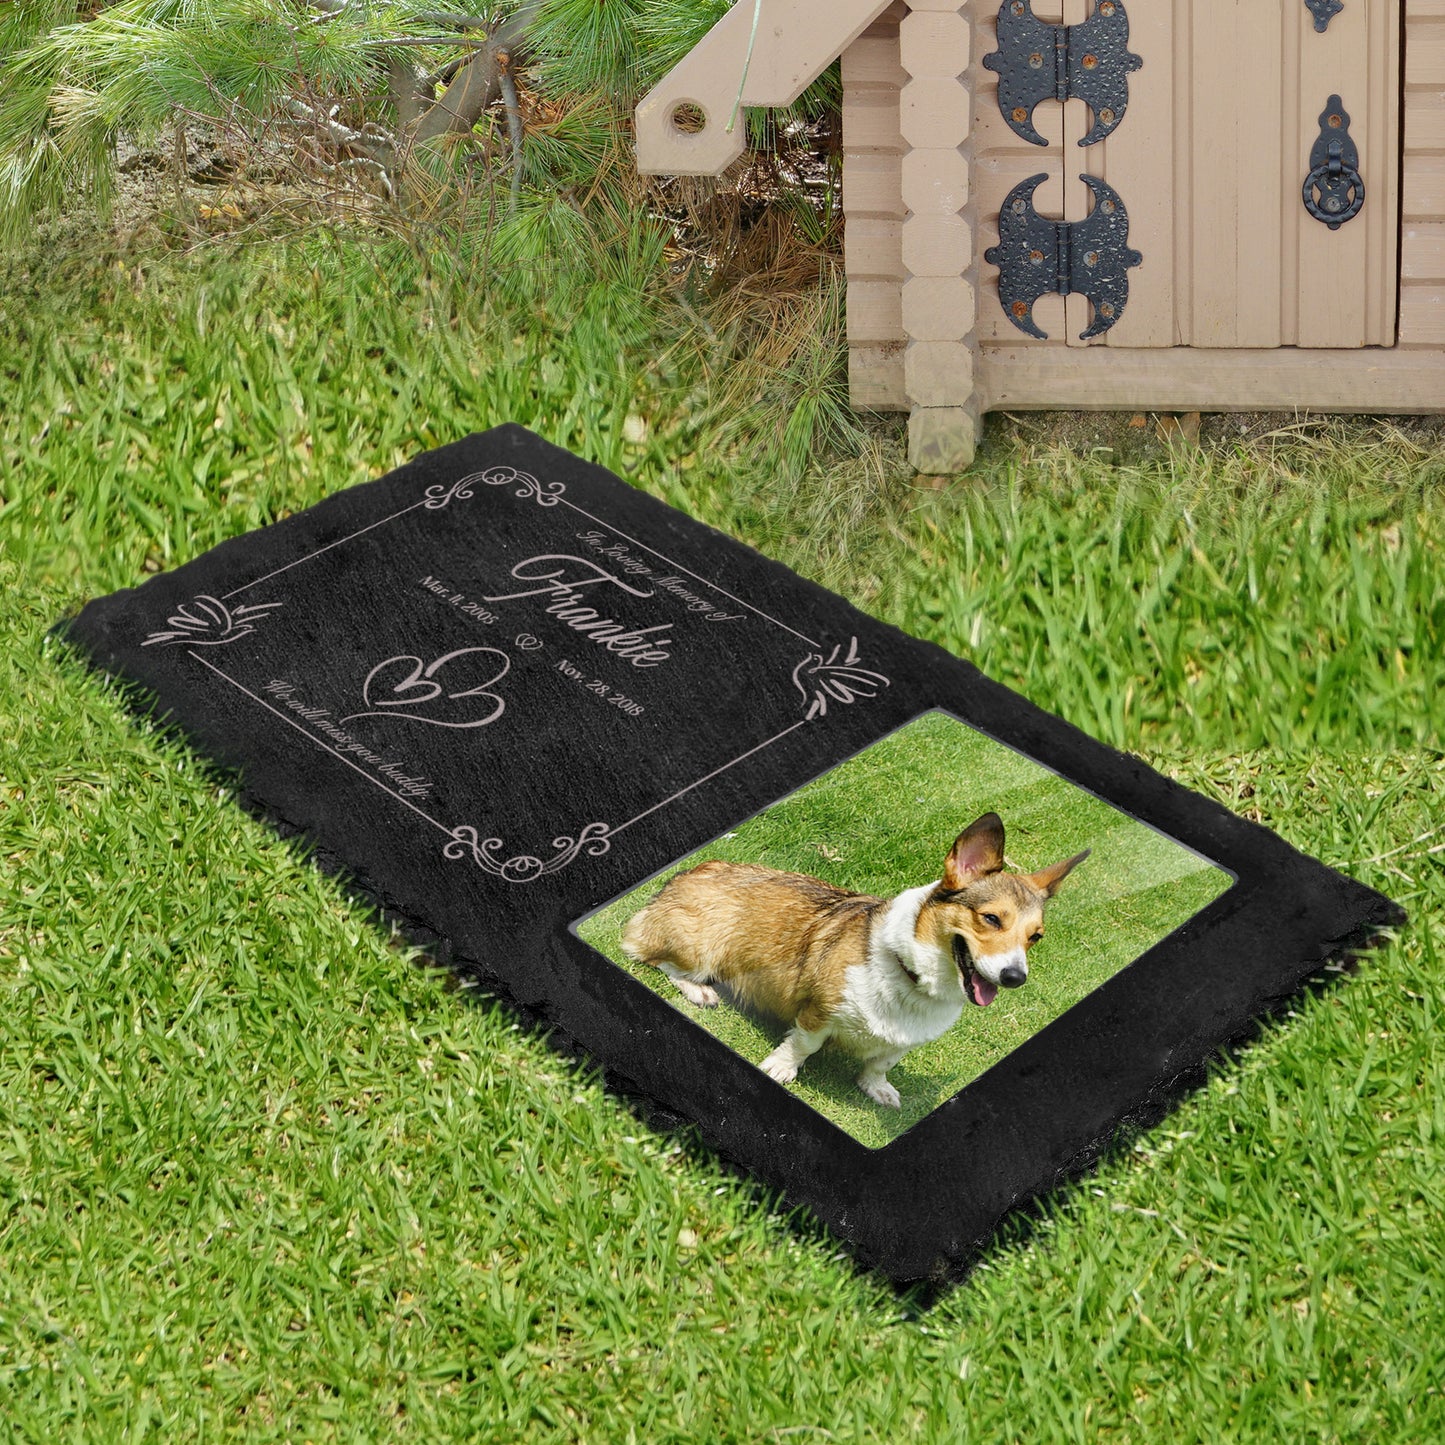 Fanery sue Custom Pet Memorial Stones with Full Color Picture, Dog Cat Memorial Garden Stones, Pet Grave Markers Personalized, All-Natural Memorial Headstone for Pet